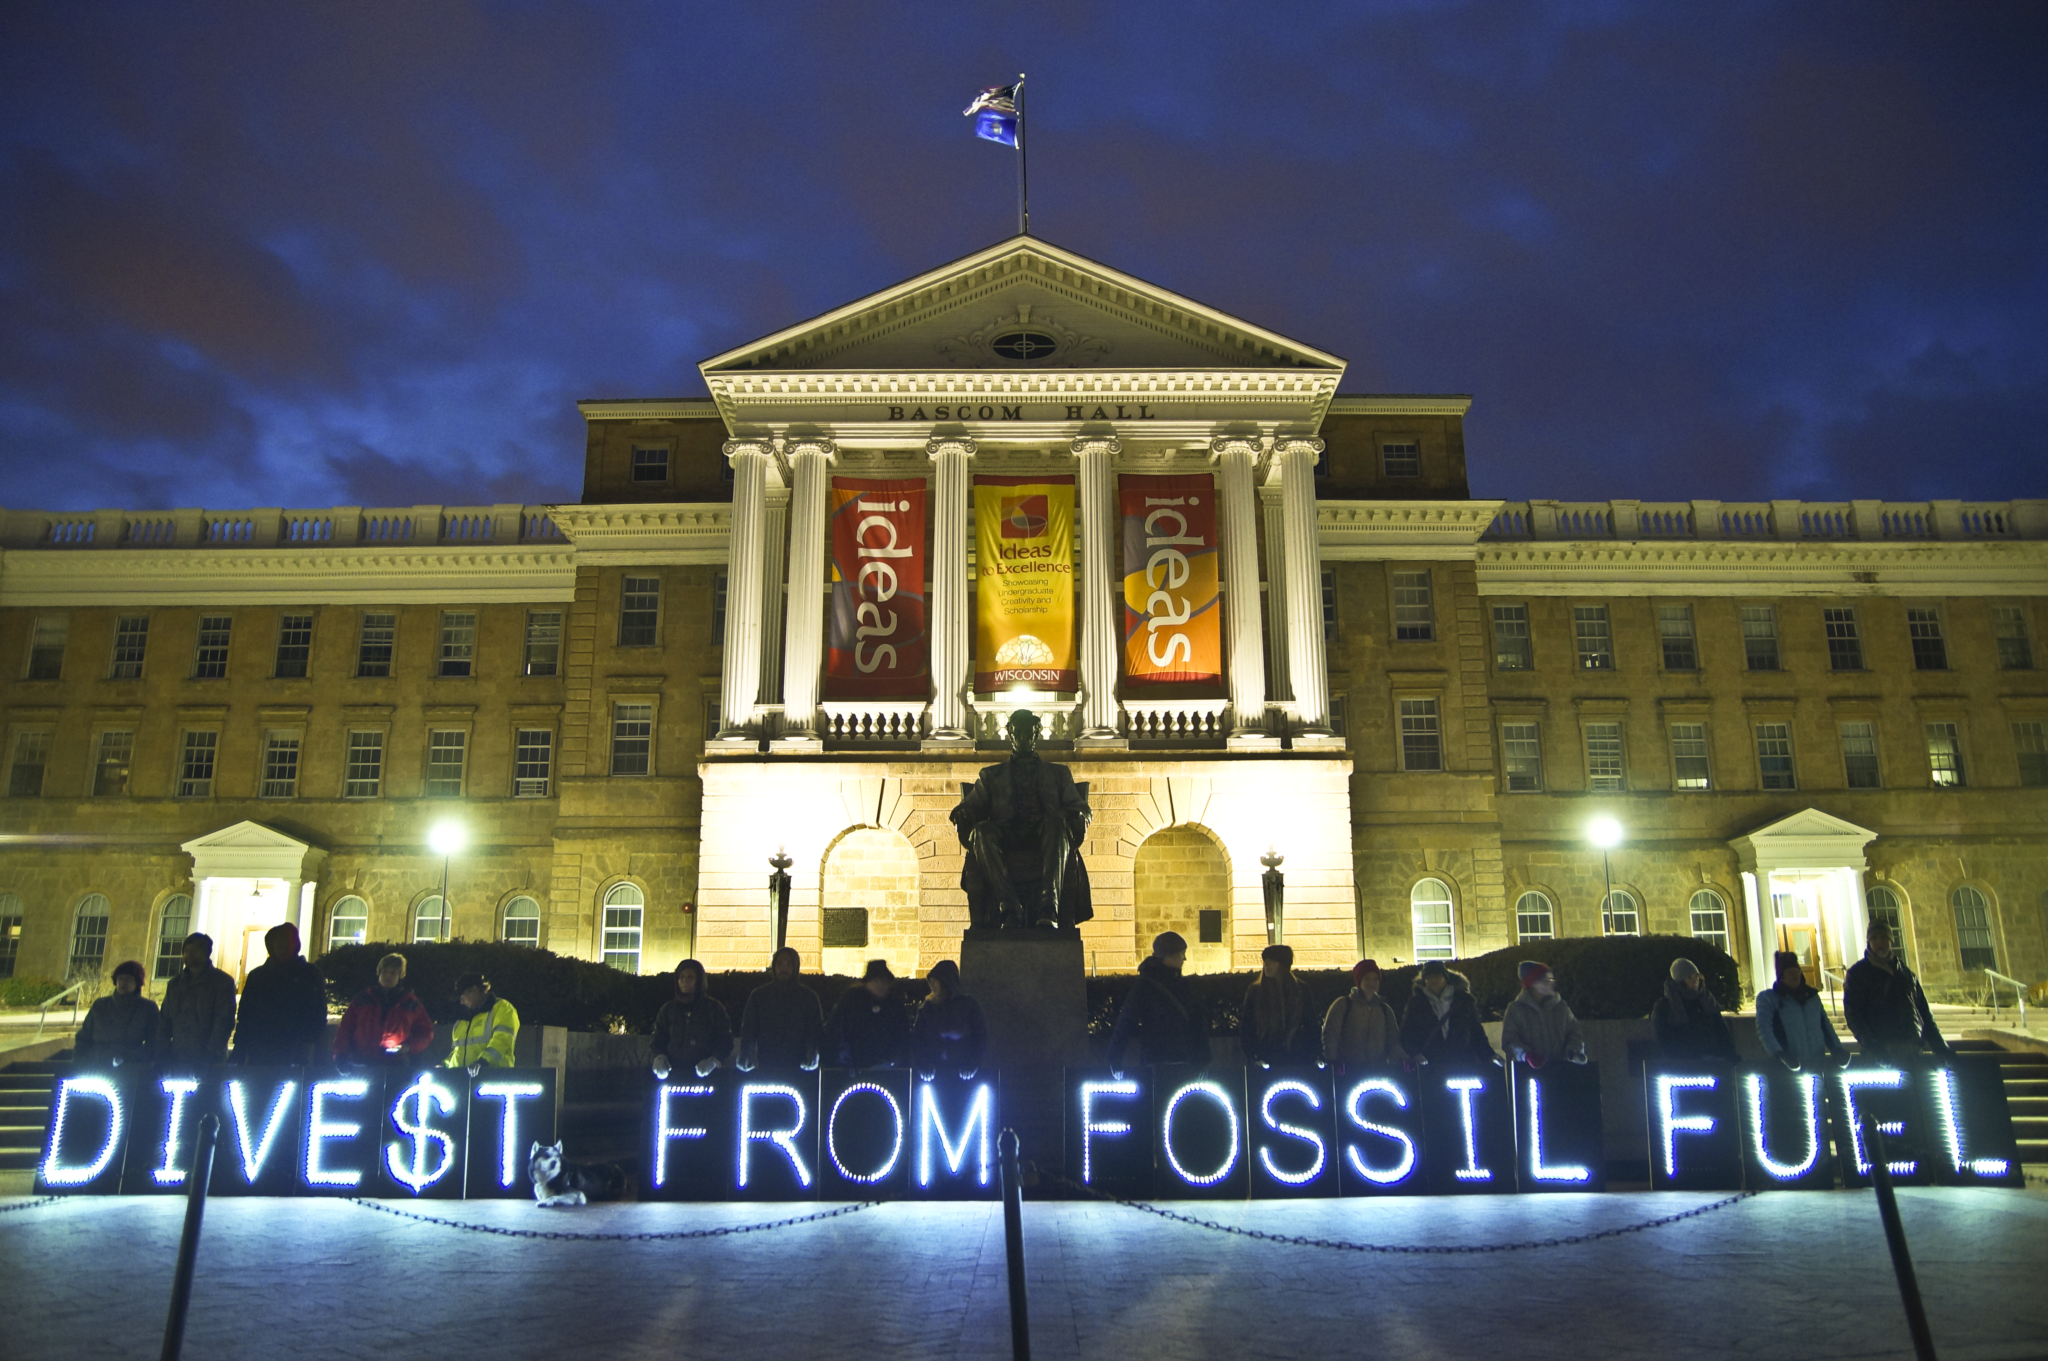 <p>Neither the idea of stranded assets nor the global campaign to divest from fossil fuels has taken root in Latin America (image: <a href="https://www.flickr.com/photos/40969298@N05/13635340783" target="_blank" rel="noopener">Joe Brusky</a>)</p>